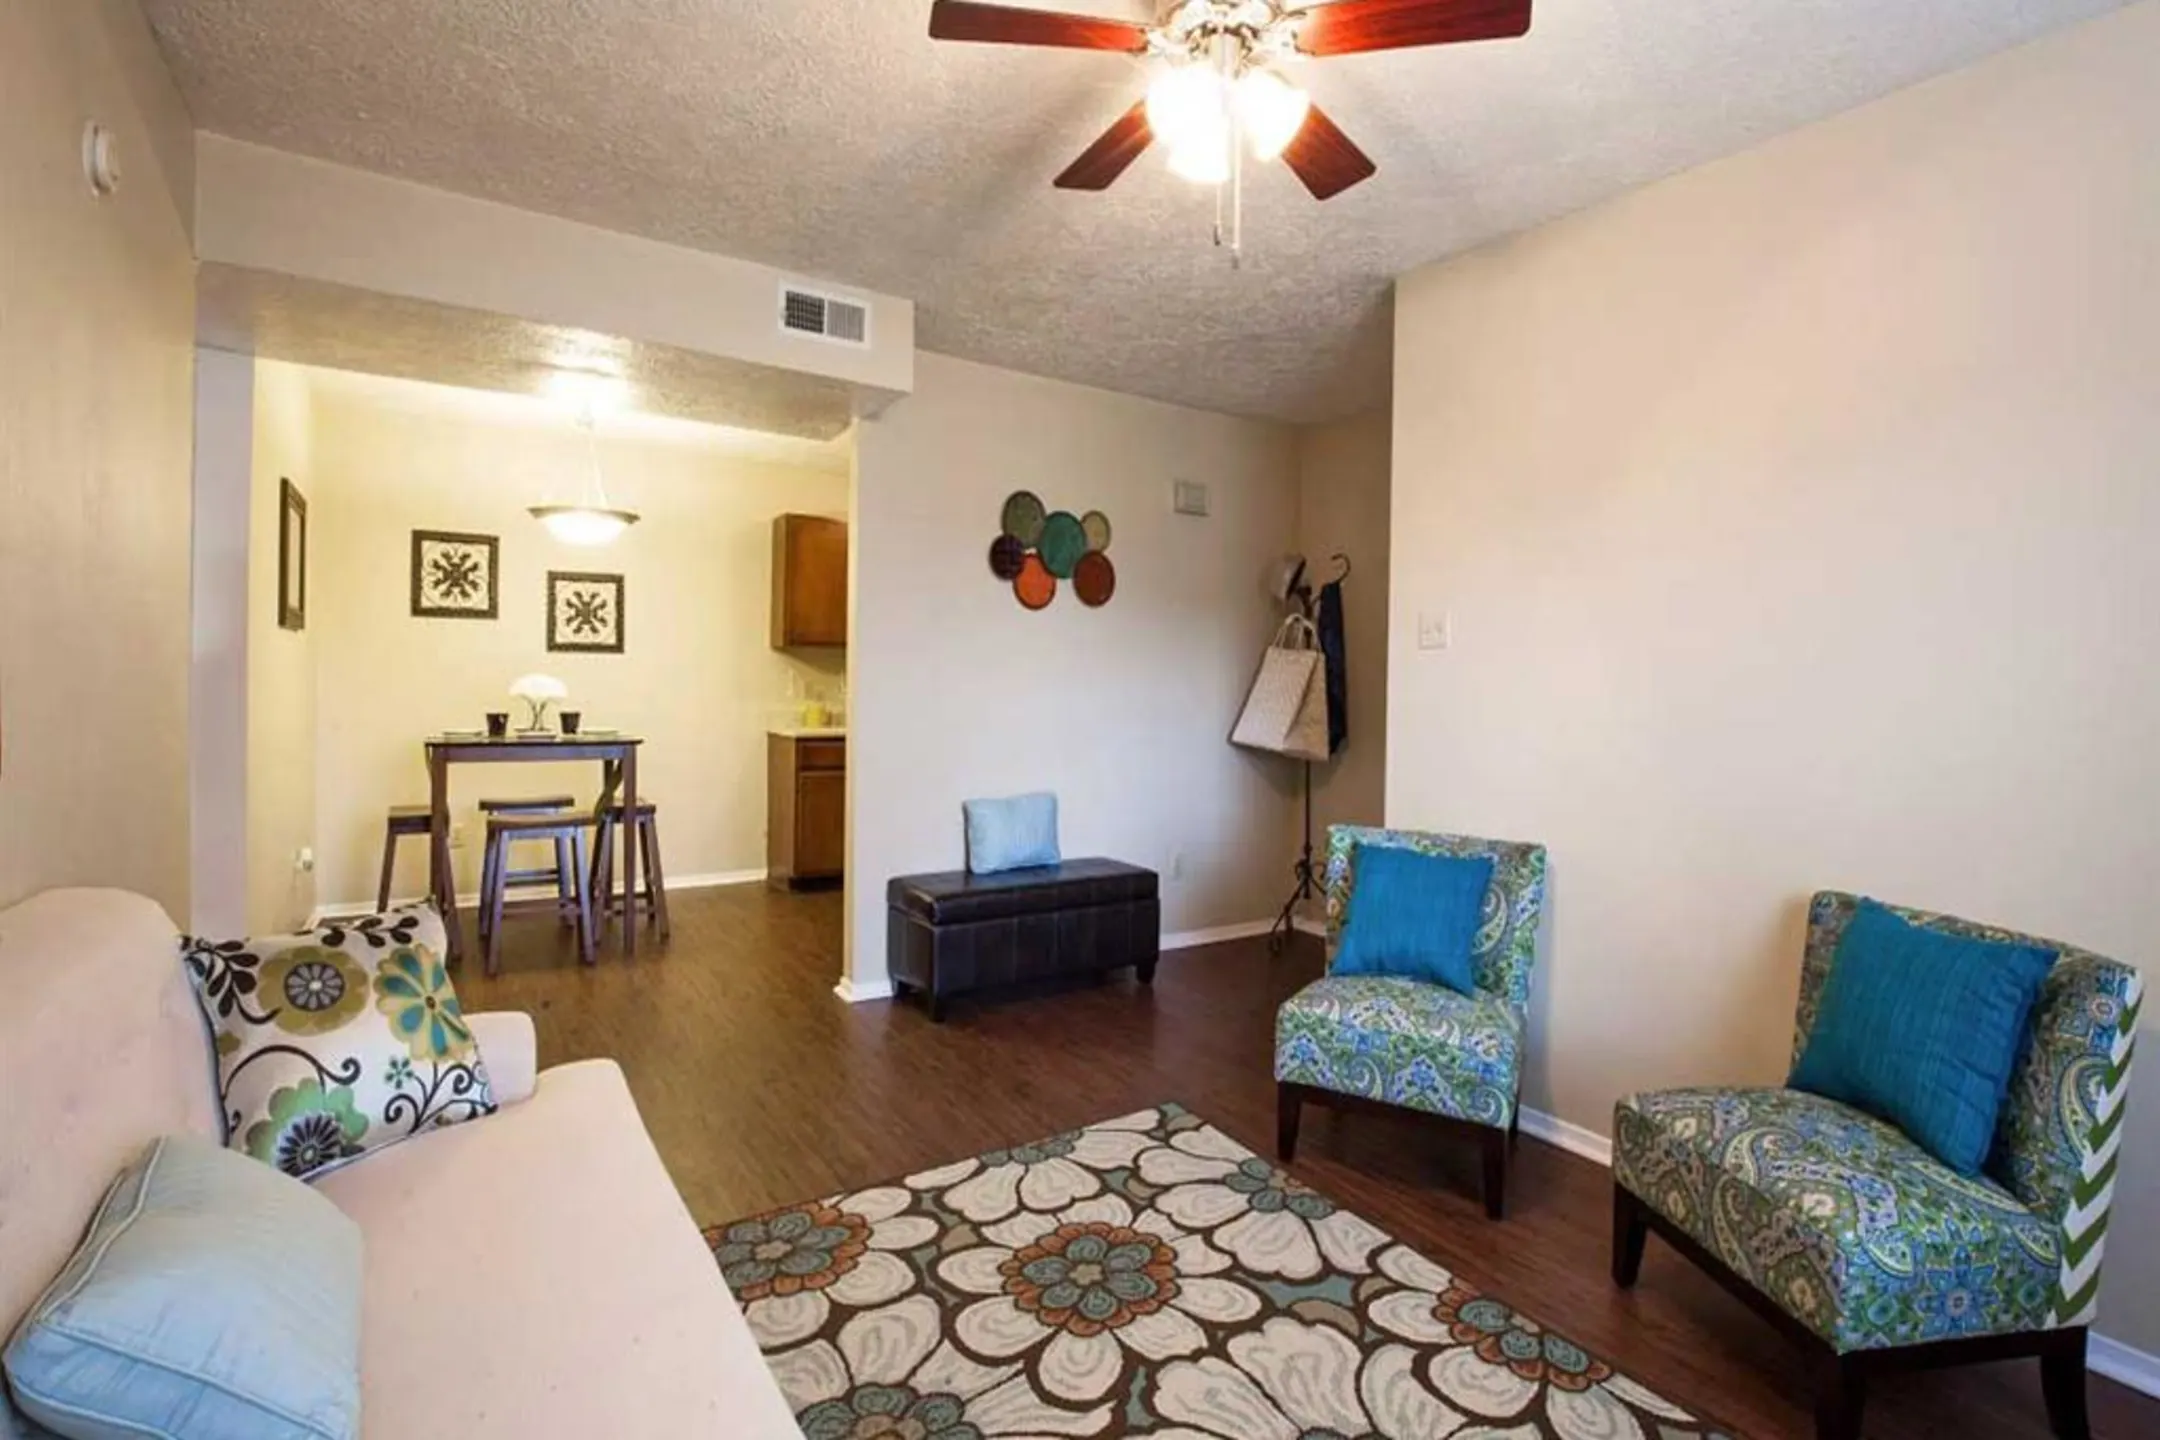 Living Room - Hunters Point Apartments - College Station, TX